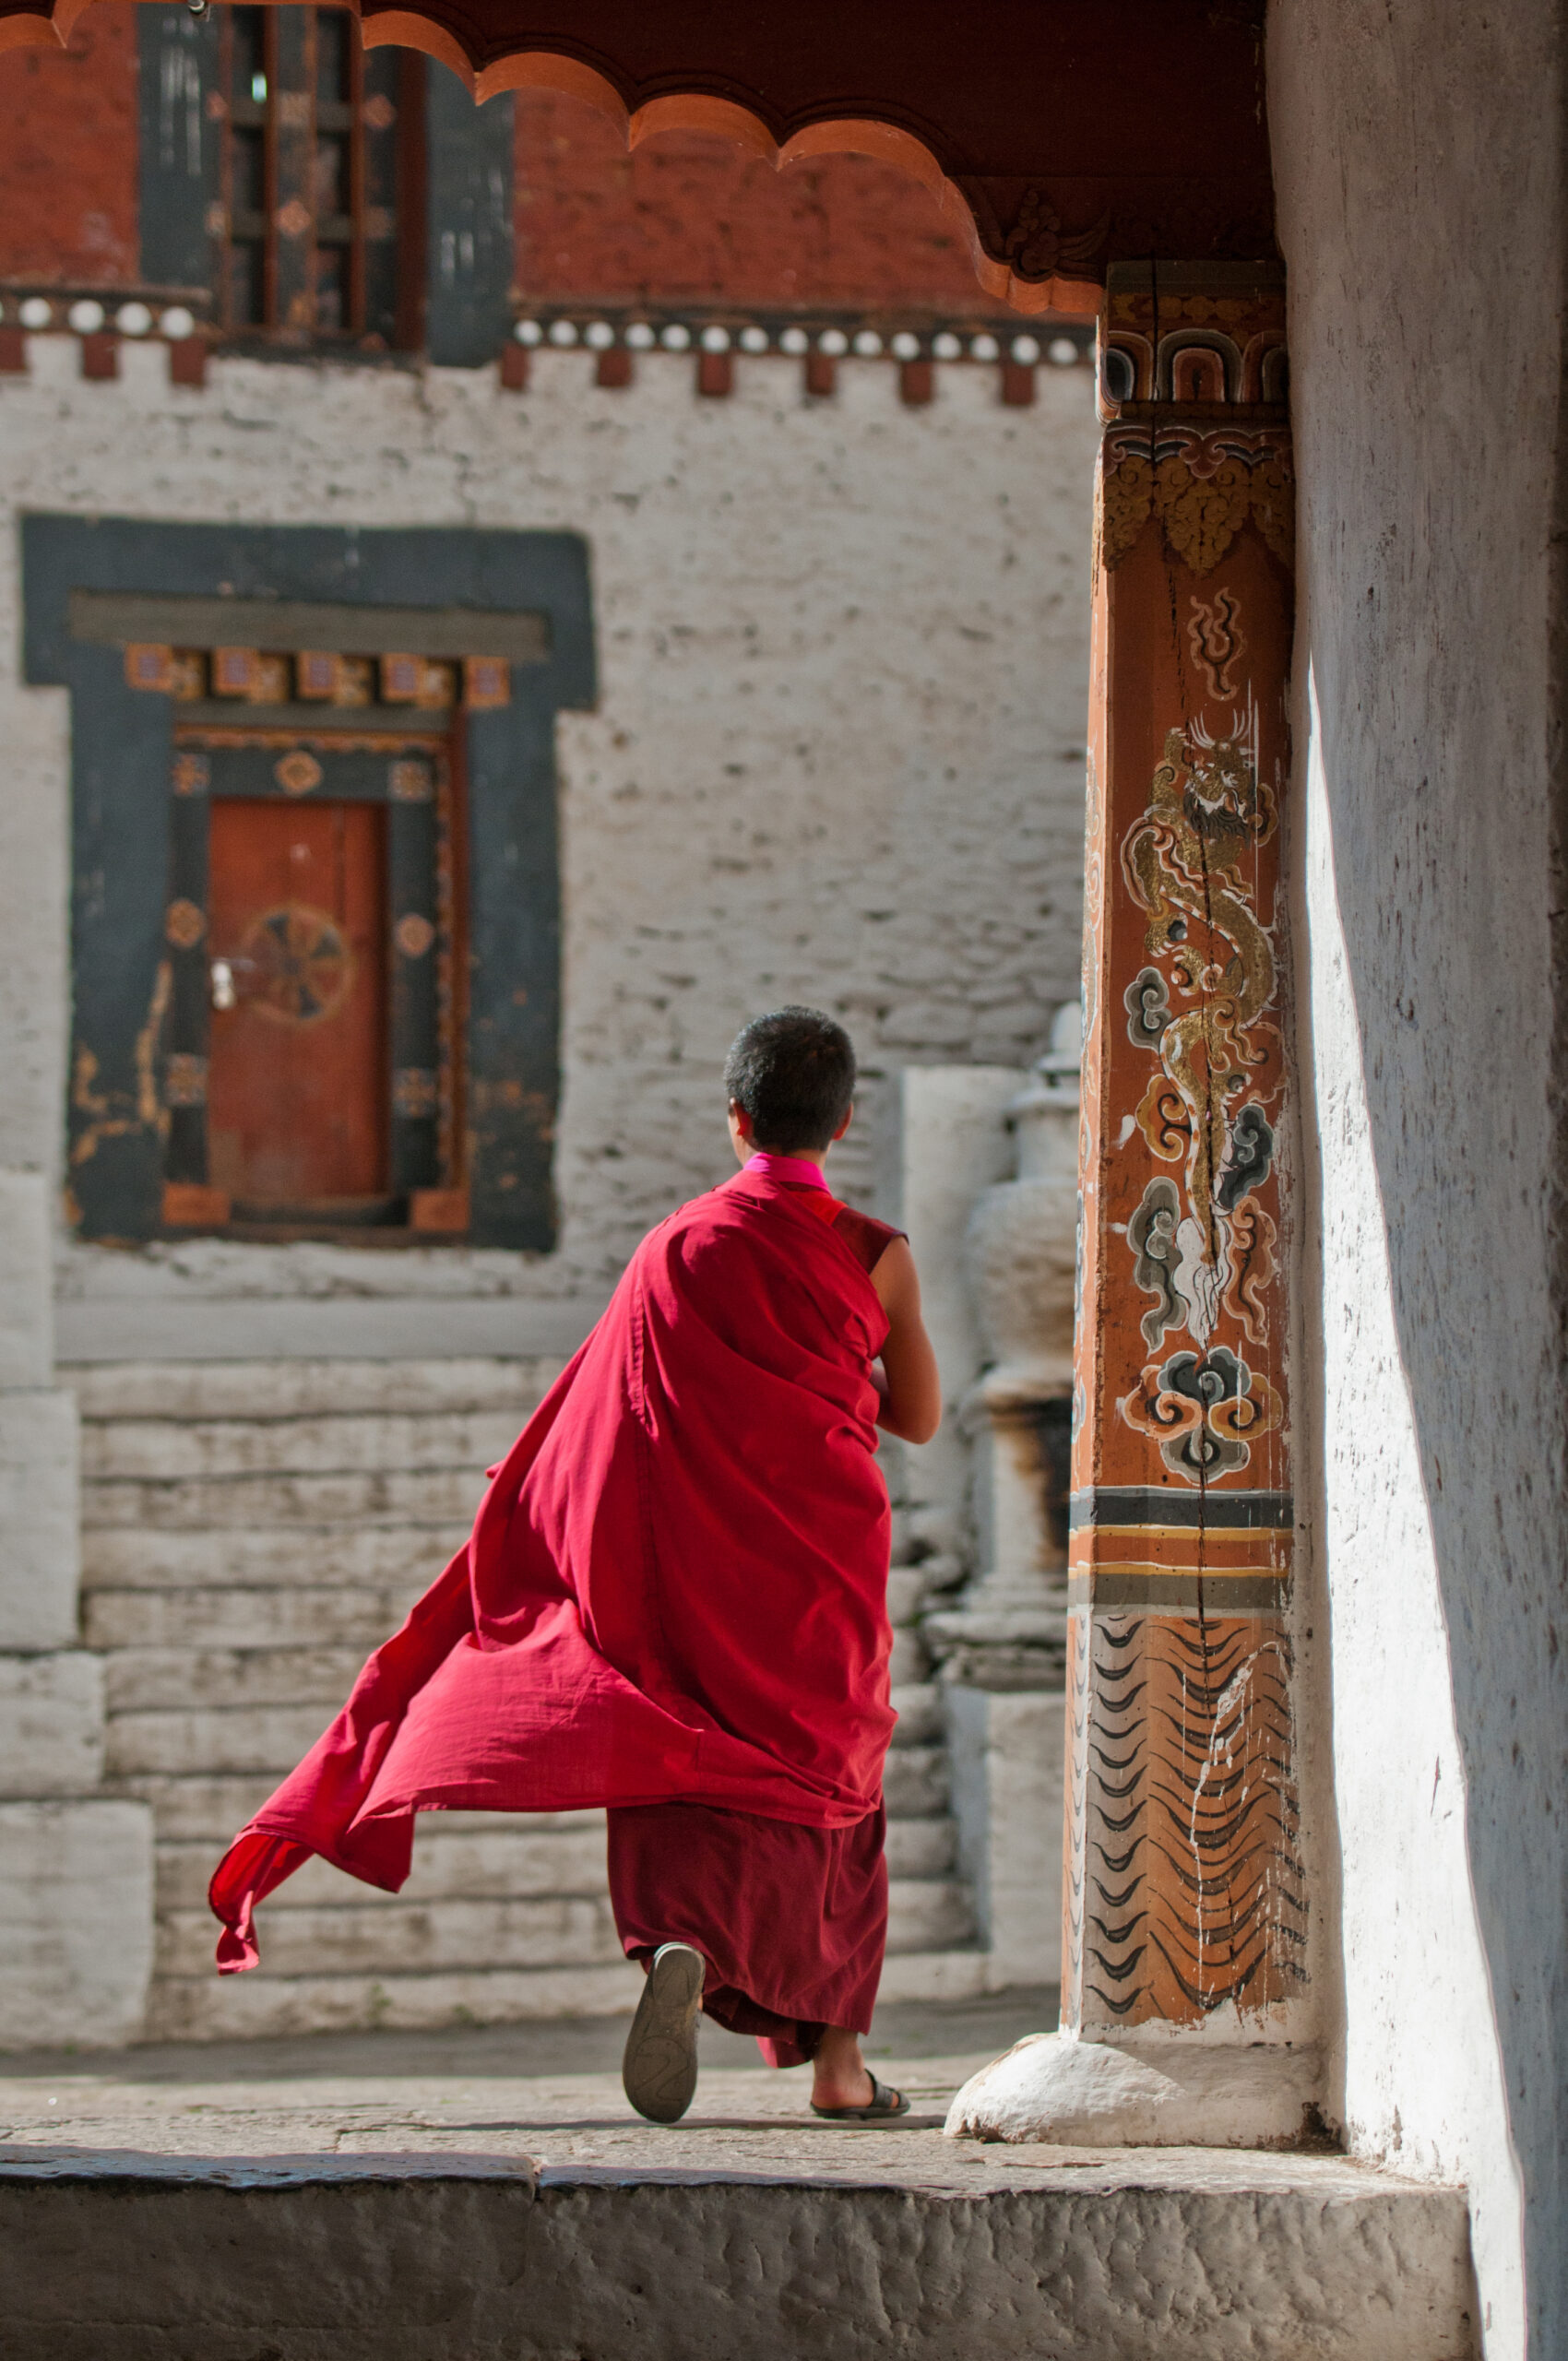 The Best Cultural Experiences To Have In Bhutan